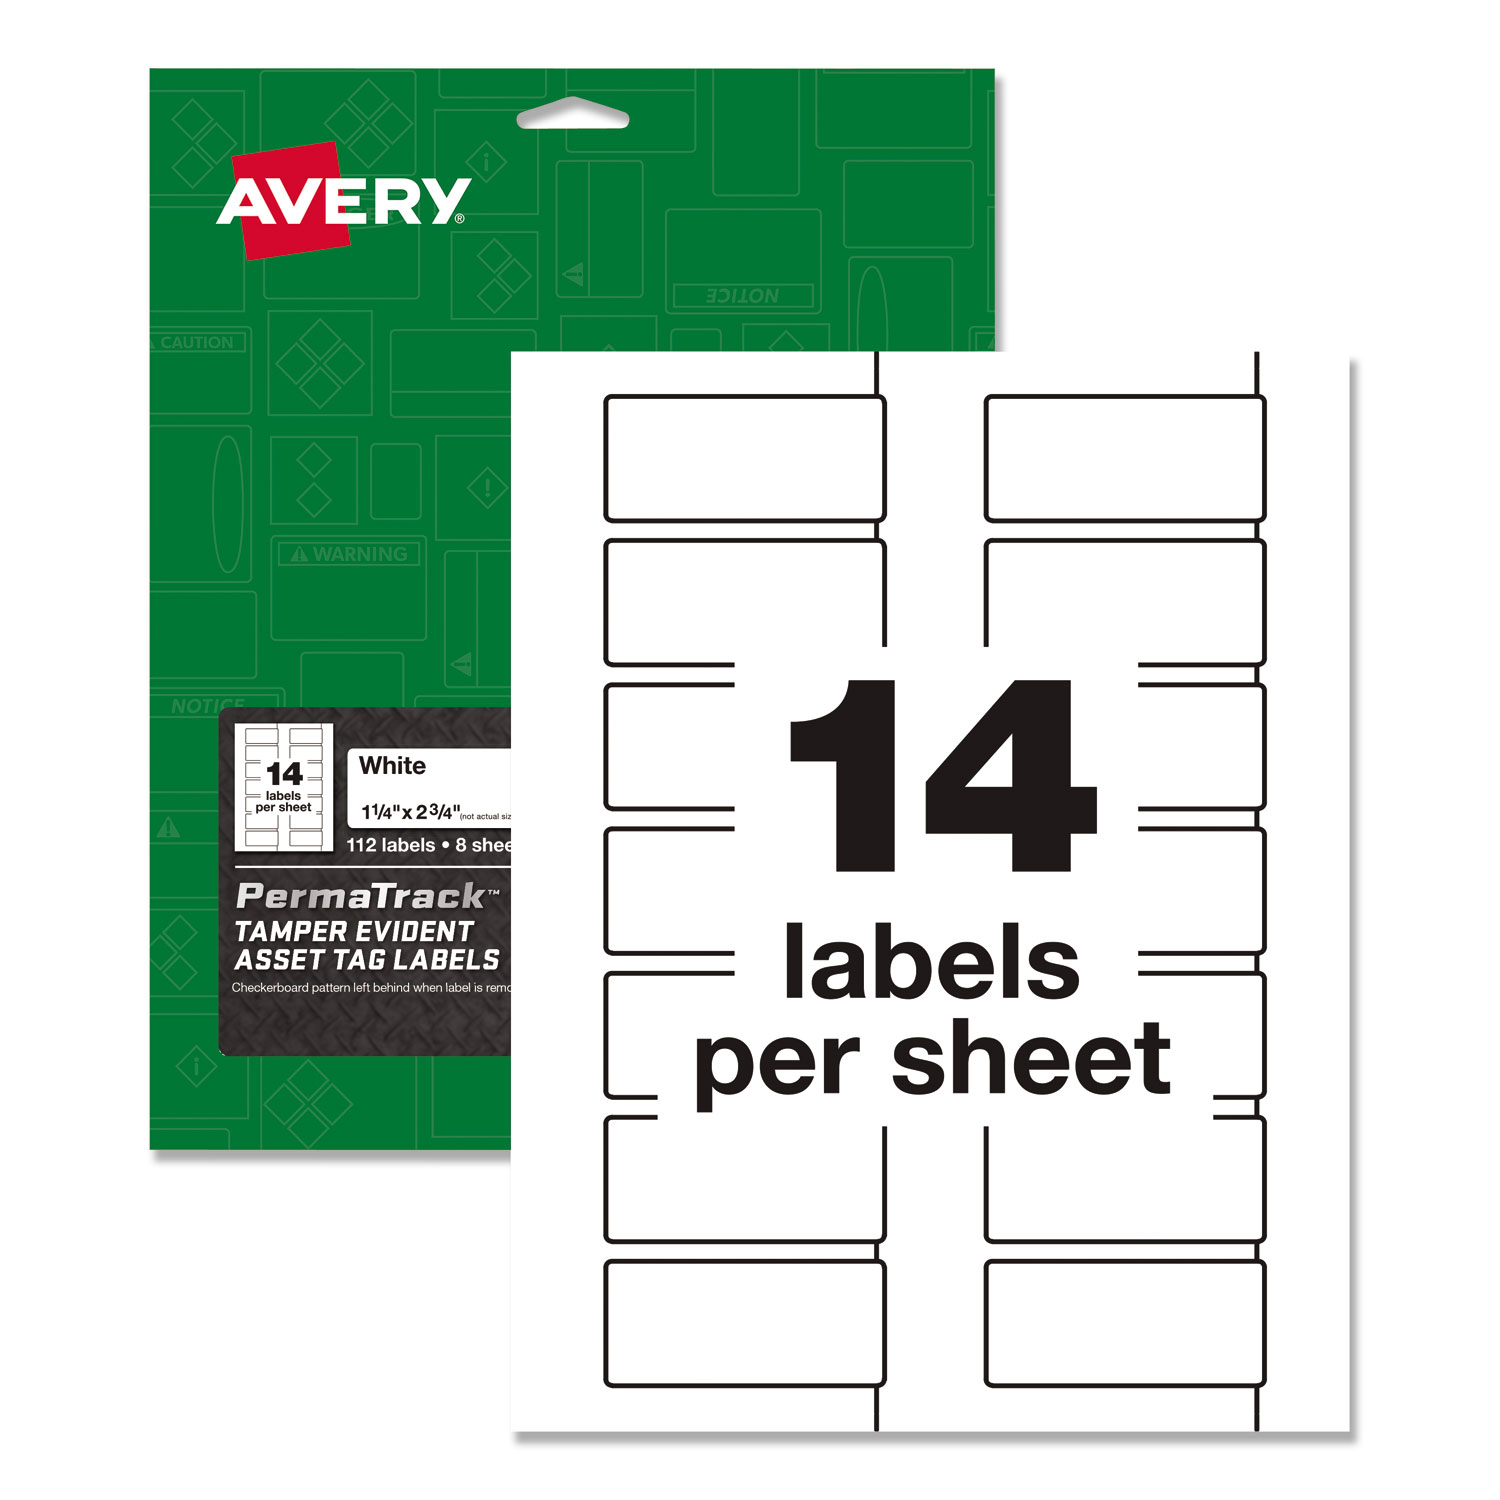  Avery 60536 PermaTrack Tamper-Evident Asset Tag Labels, Laser Printers, 1.25 x 2.75, White, 14/Sheet, 8 Sheets/Pack (AVE60536) 